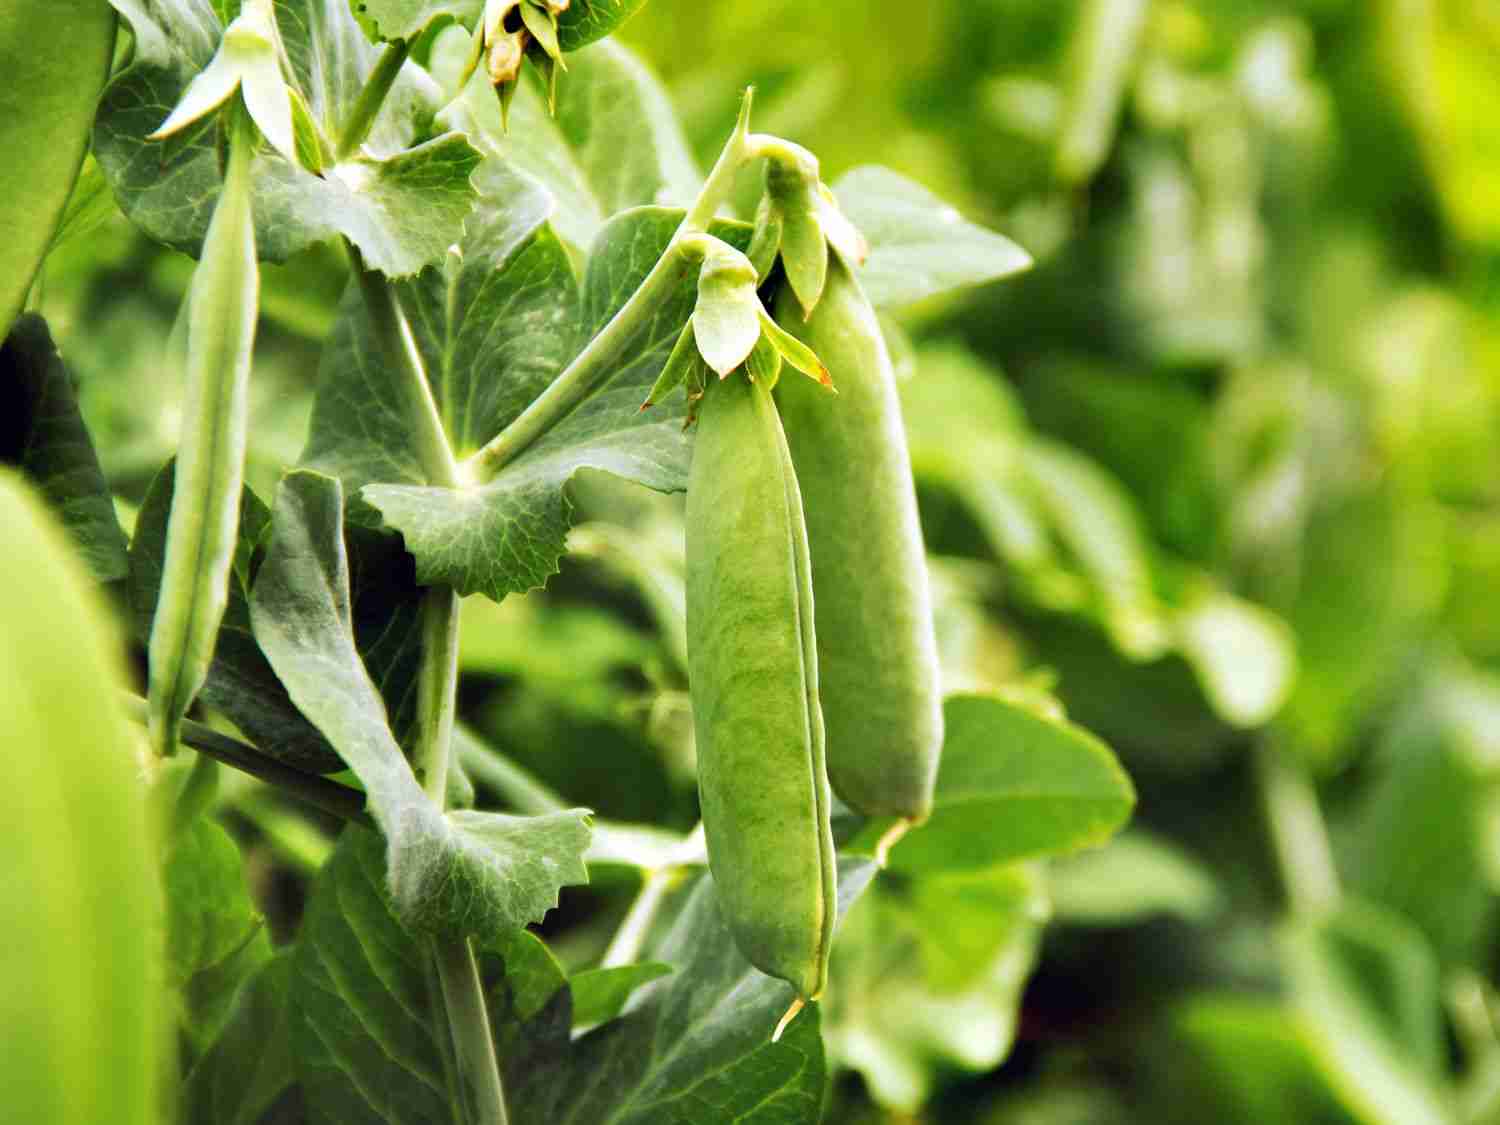 A close up photo of peas growing in the garden